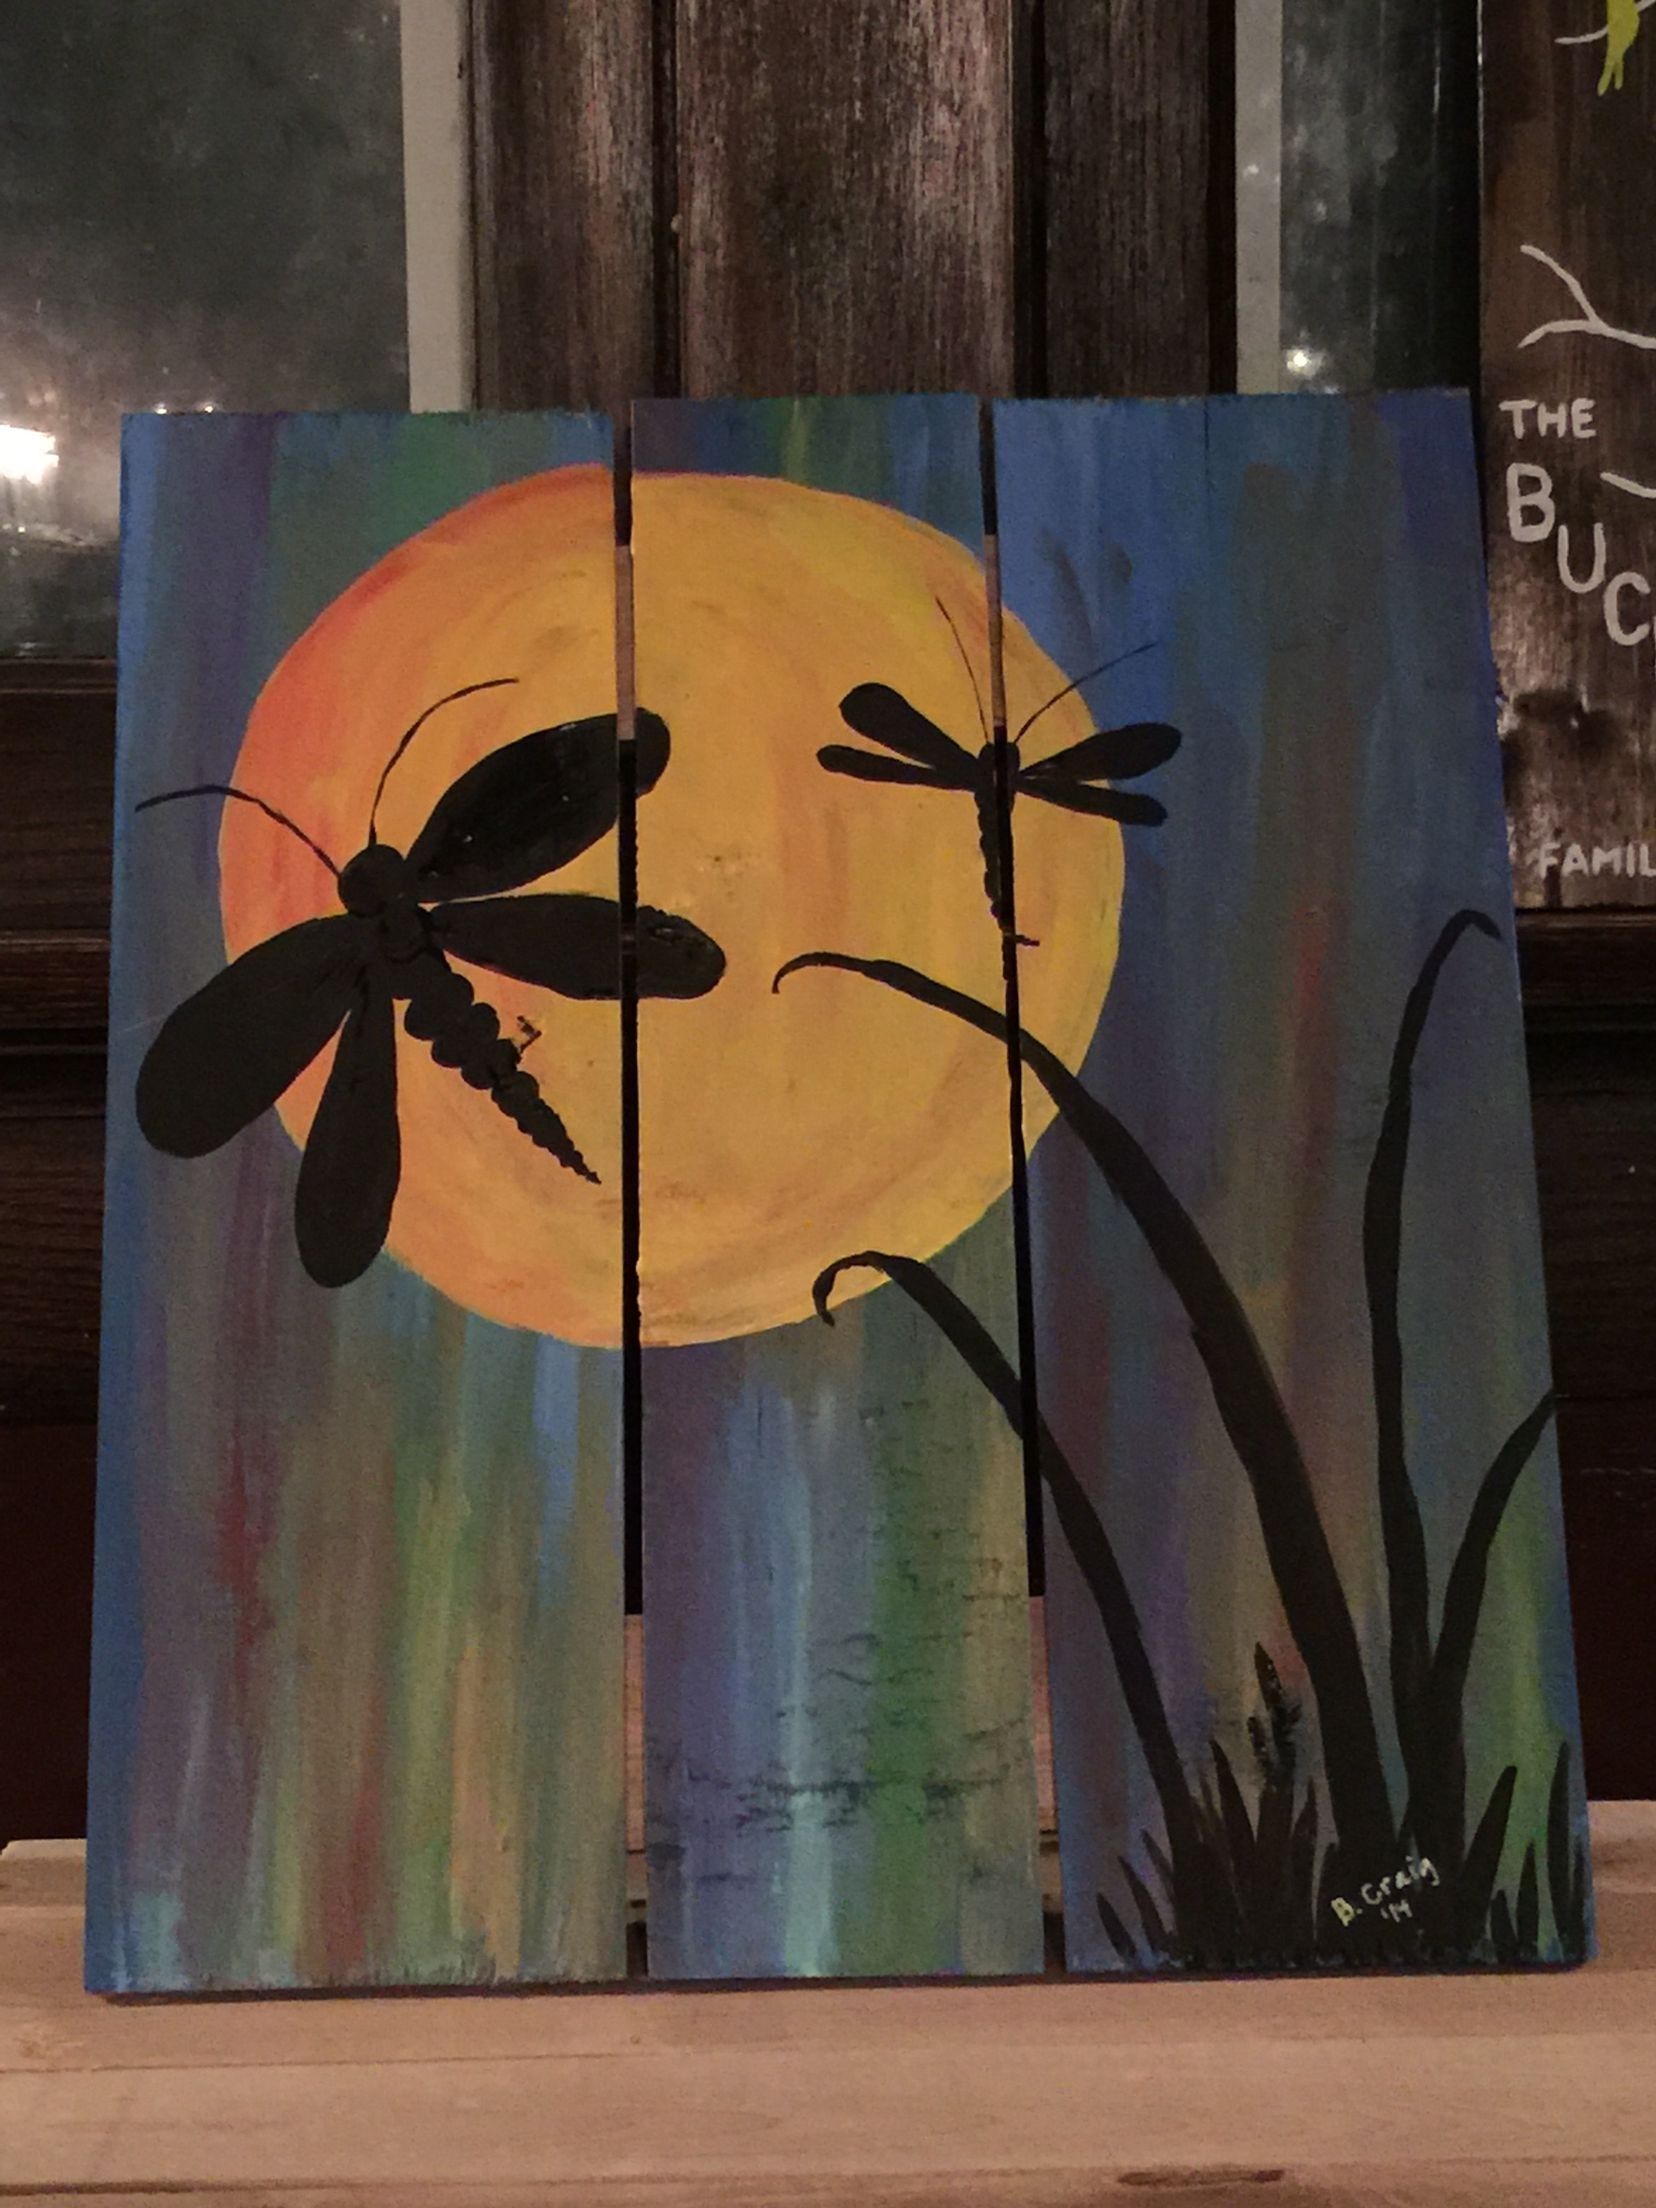 Dragonfly Painting – Acrylic On Wood | My Artwork | Pinterest Throughout Dragonfly Painting Wall Art (View 12 of 20)